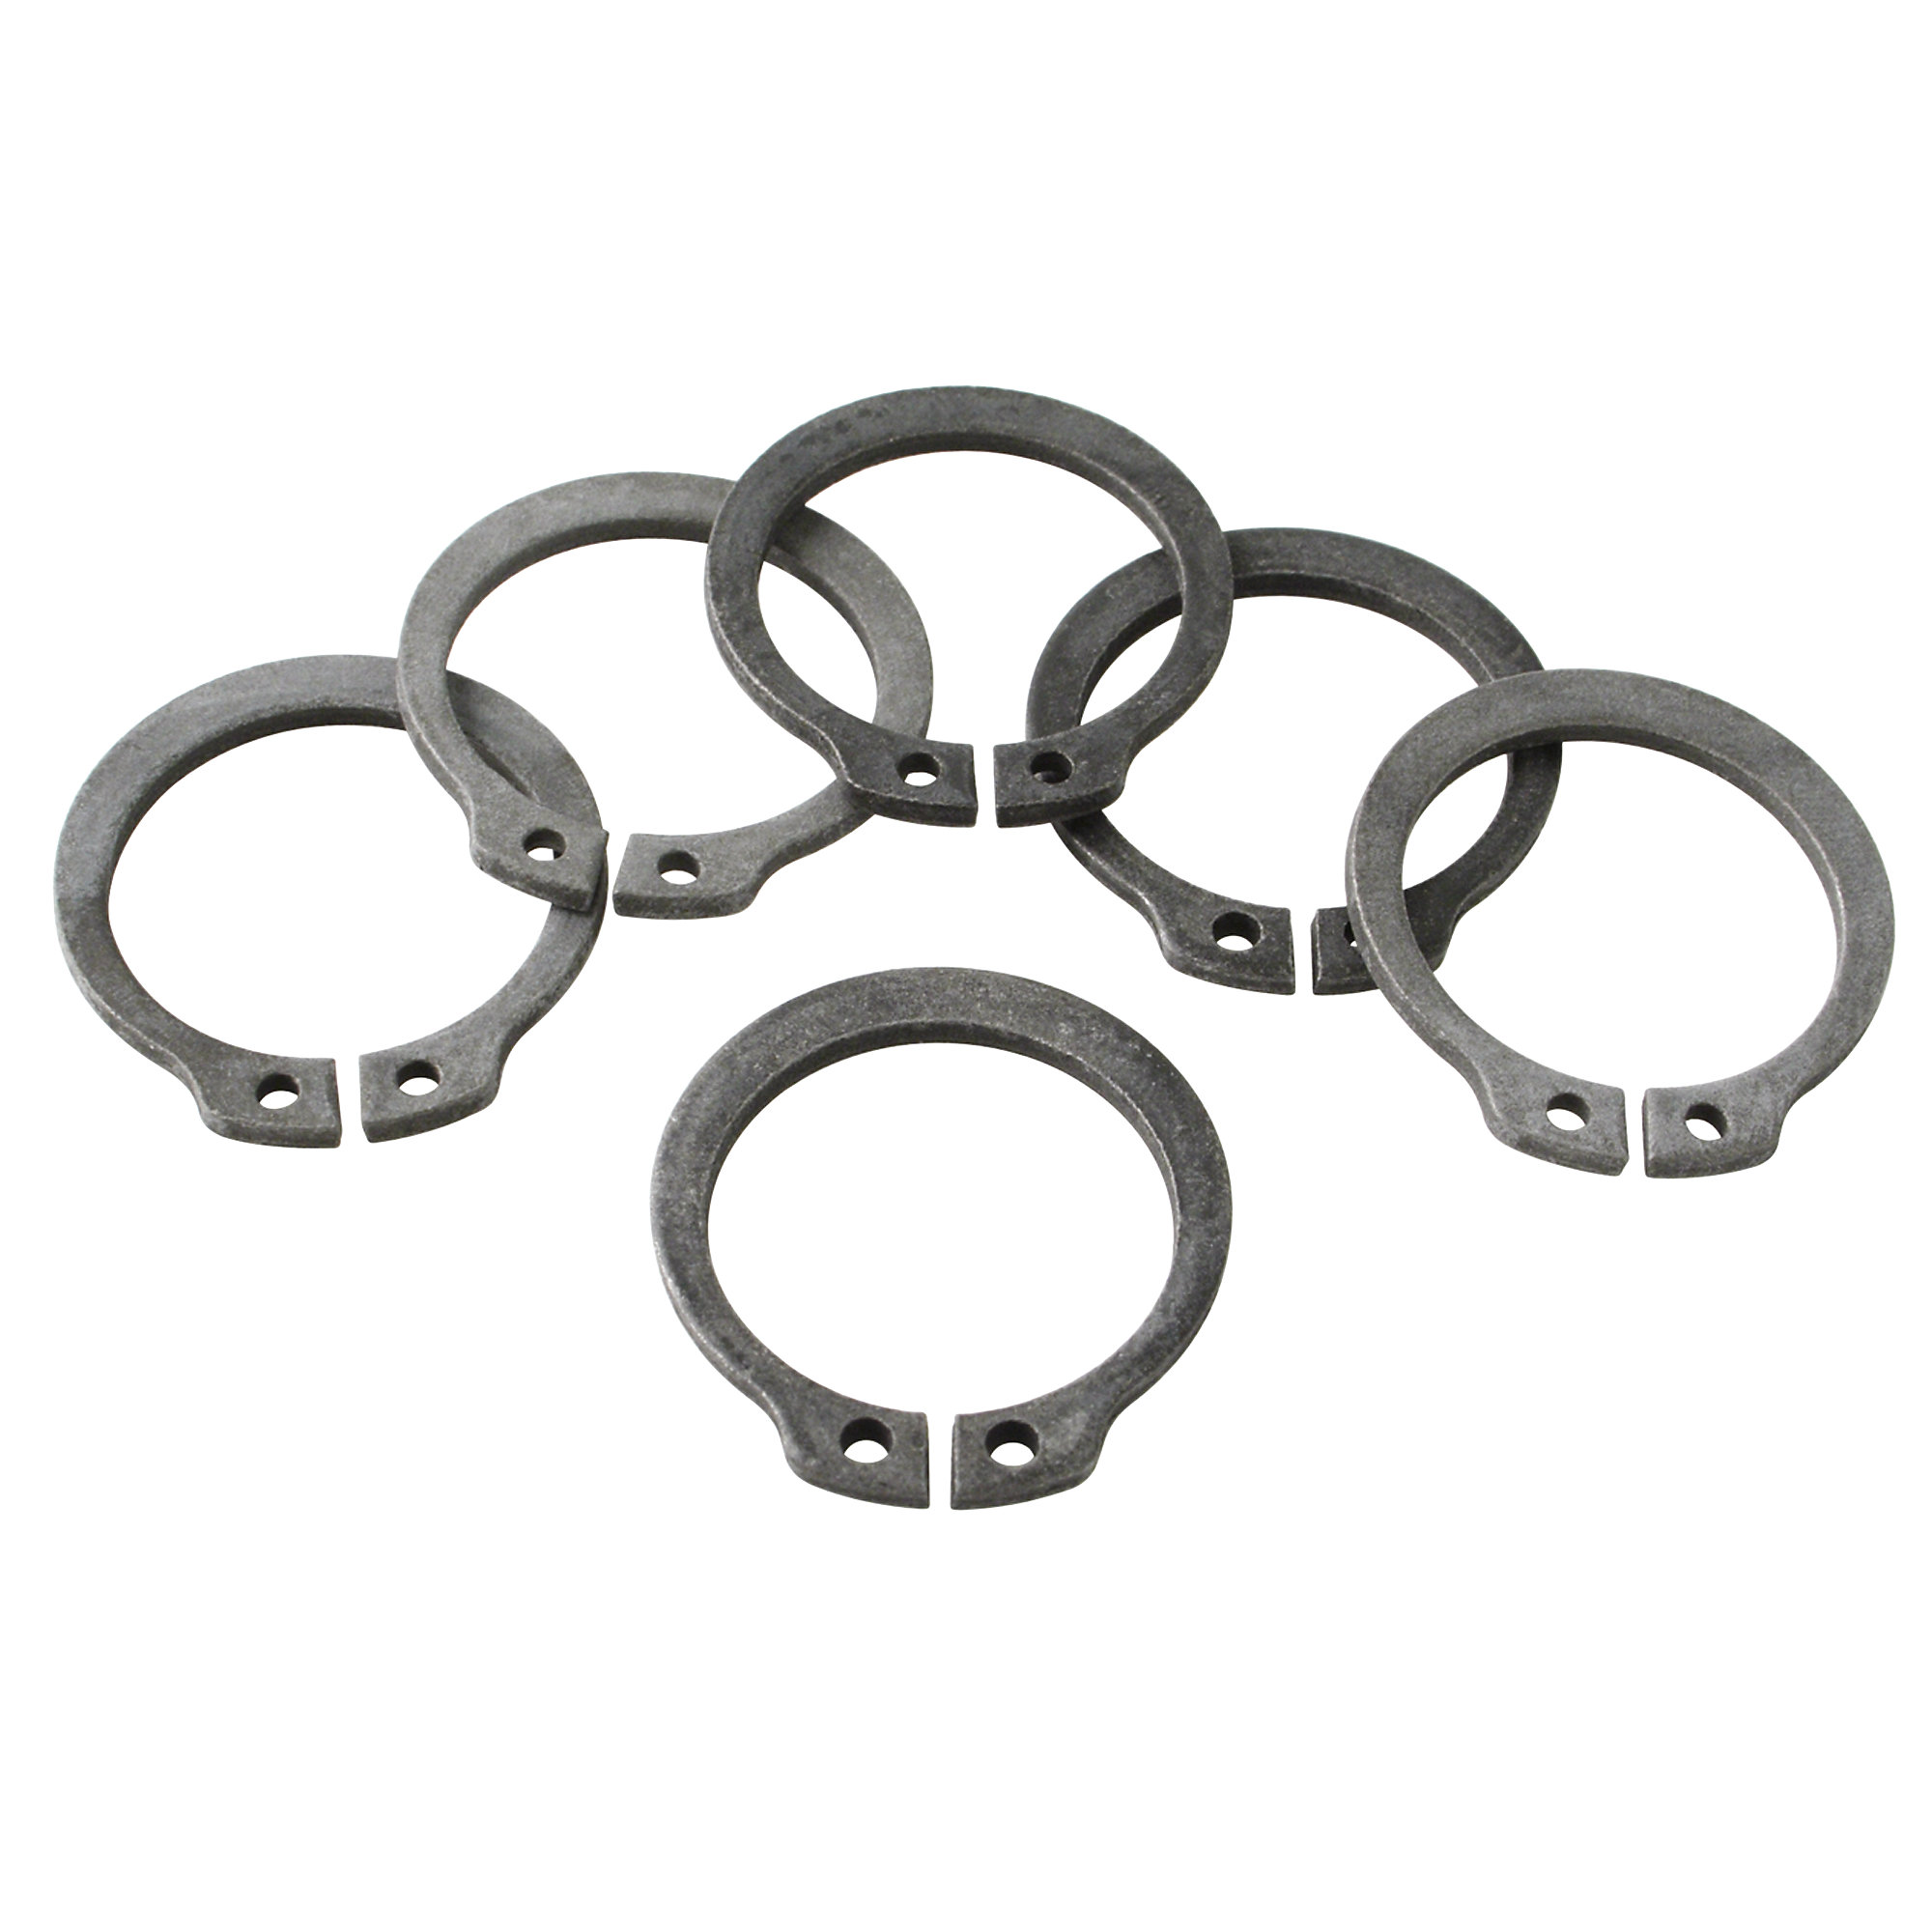 Snap Ring Drive Shaft, 6 Pack